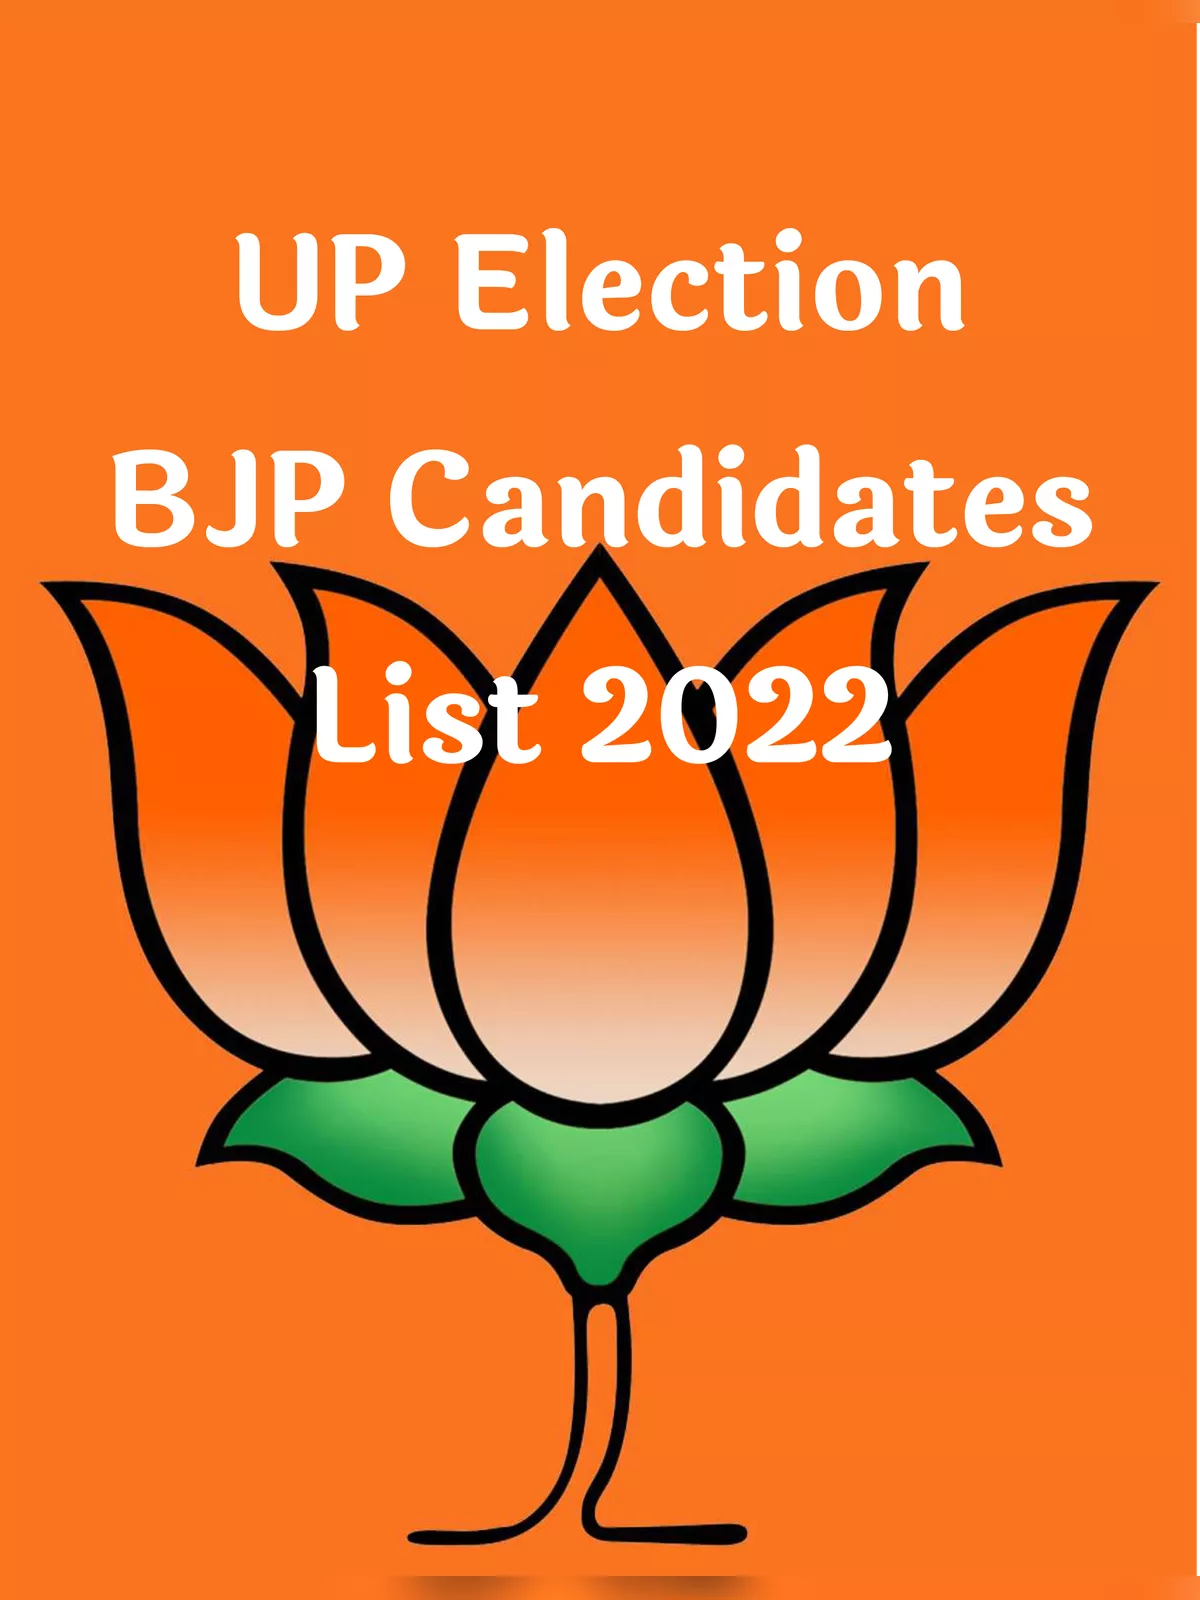 BJP Candidate List 2022 UP